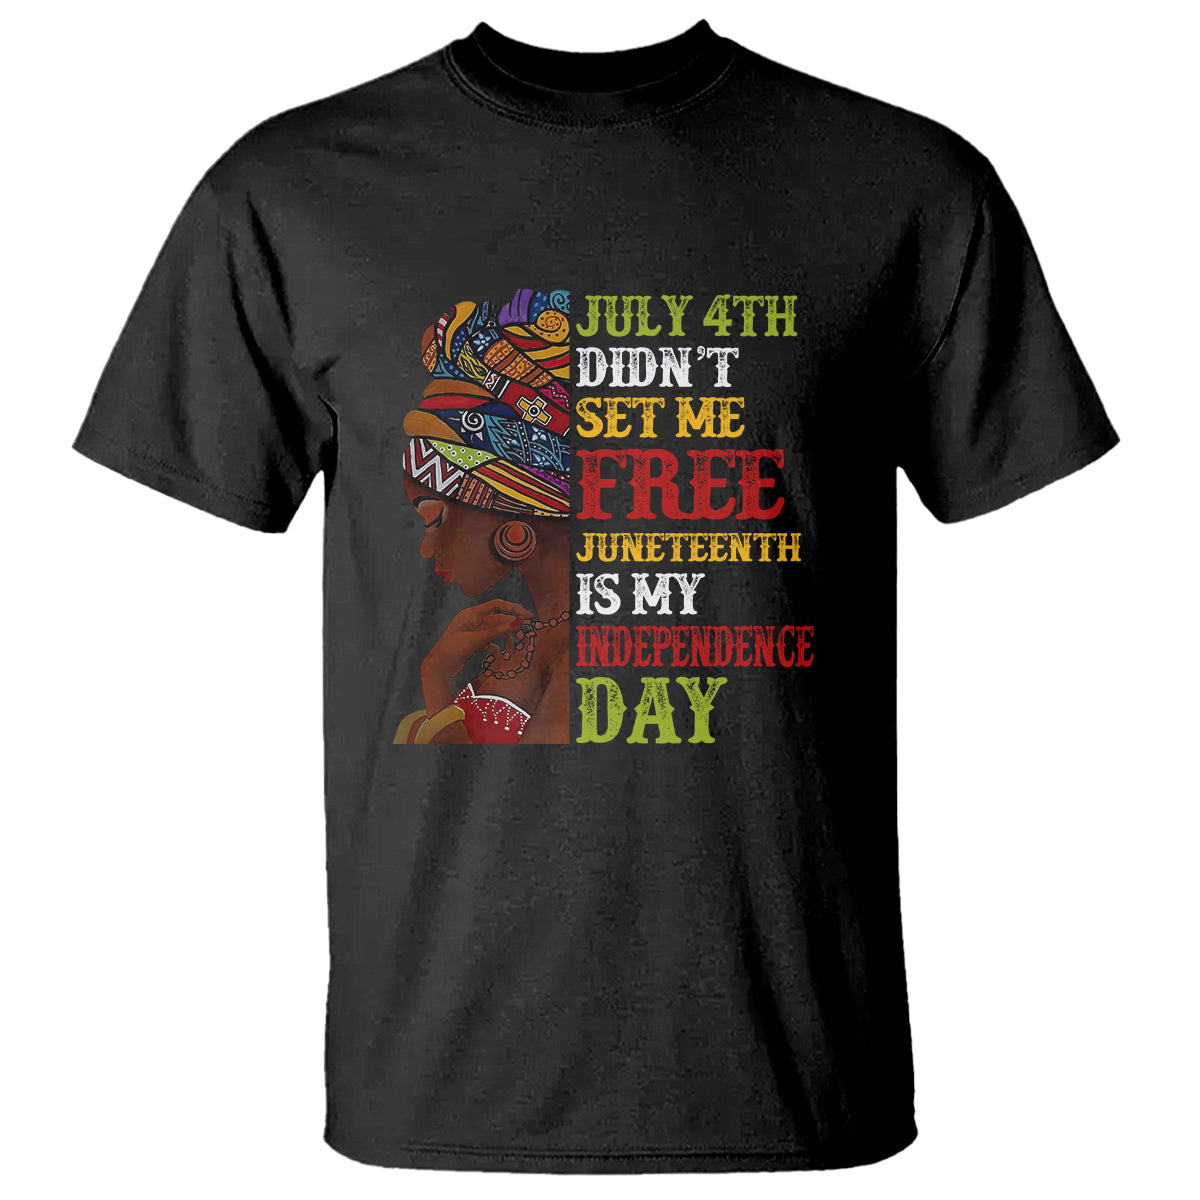 Afro Woman T Shirt Juneteenth is My Independence Day Not July 4th